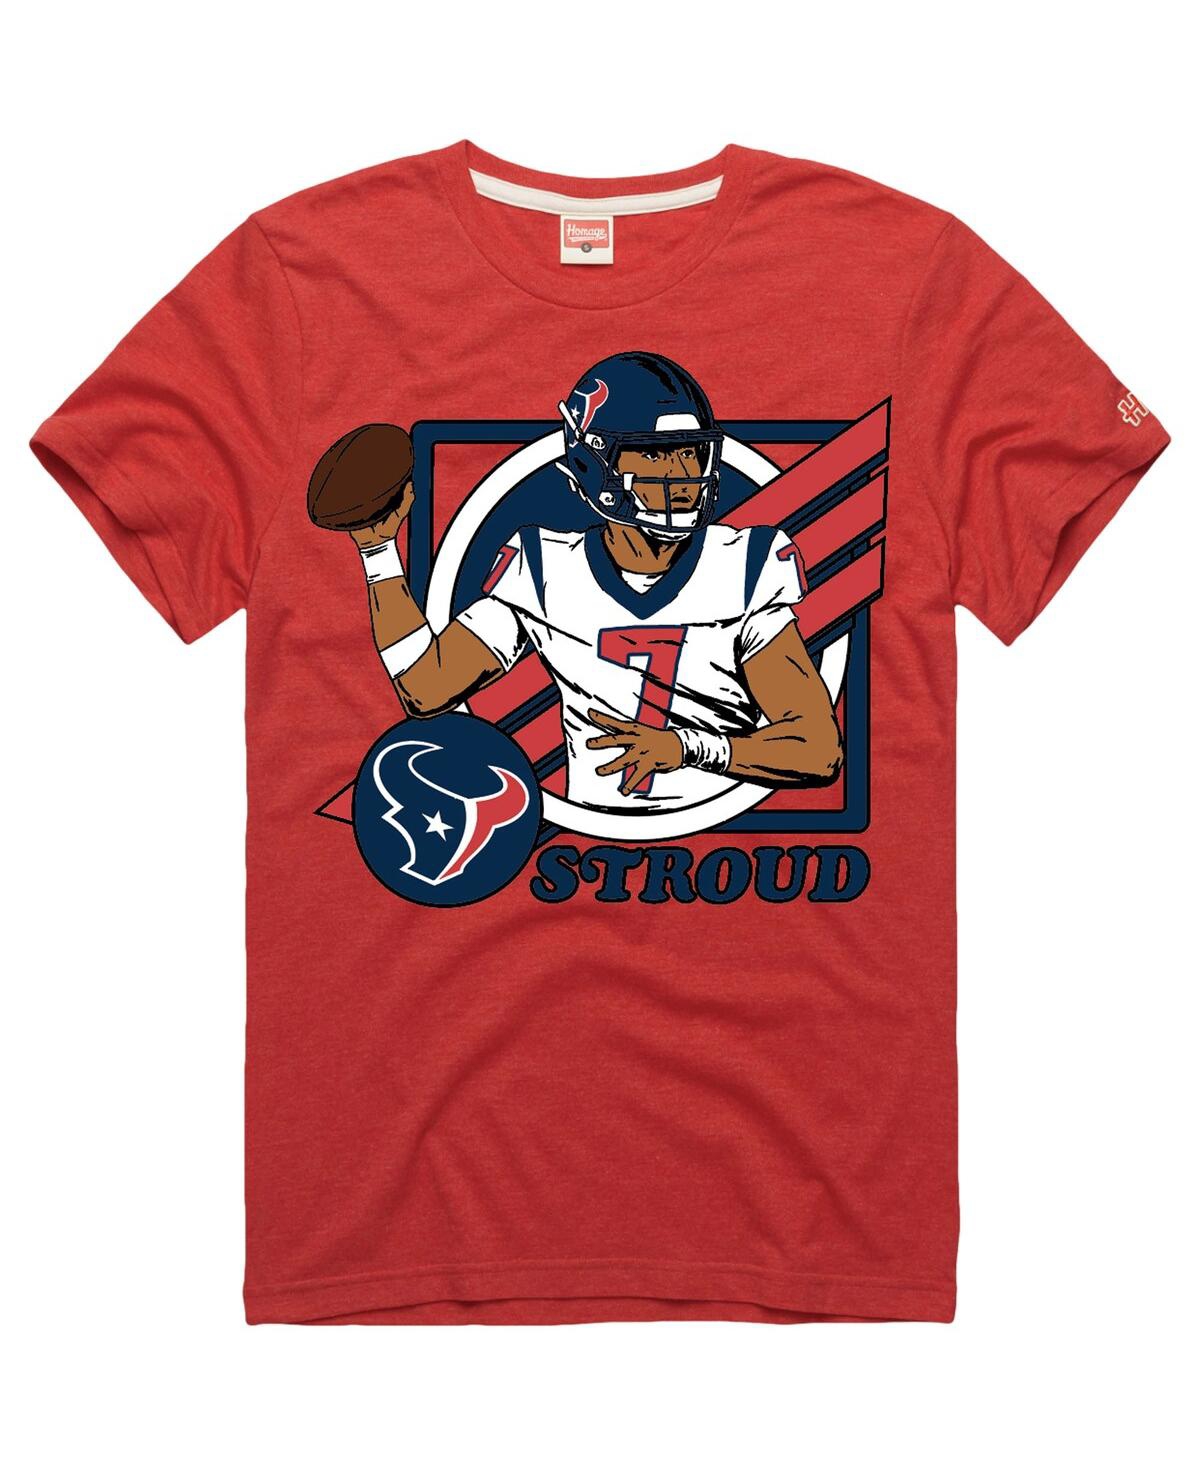 Men's Homage C.j. Stroud Red Houston Texans 2023 Nfl Draft First Round Pick Caricature Tri-Blend T-shirt - Red